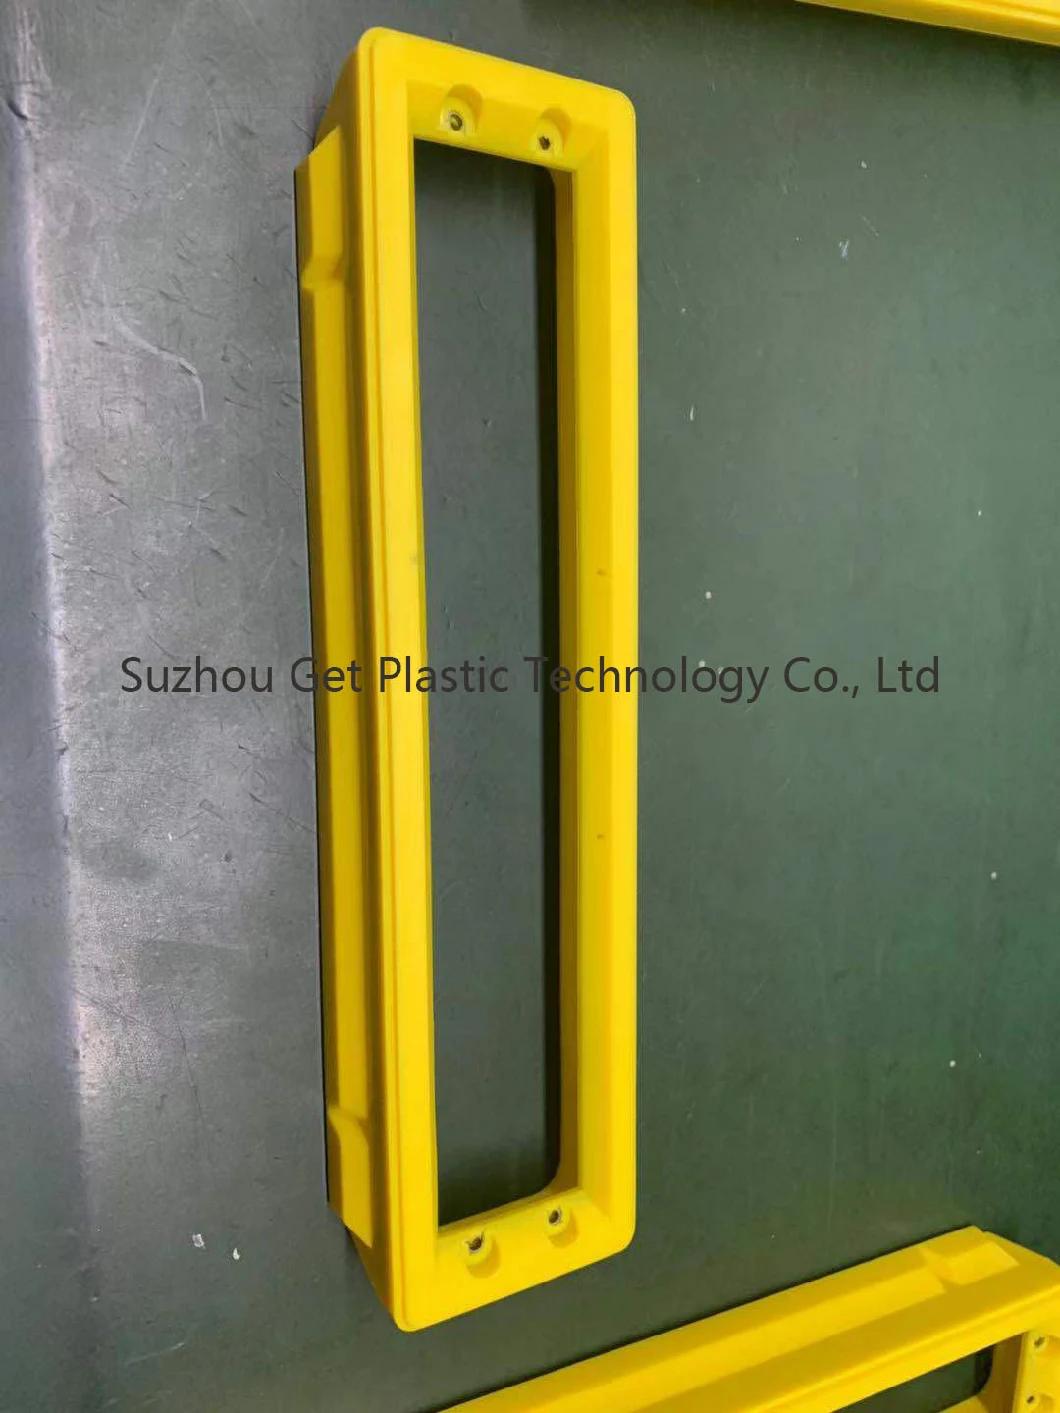 Cutomized Auto Injection Mould for Plastic Parts